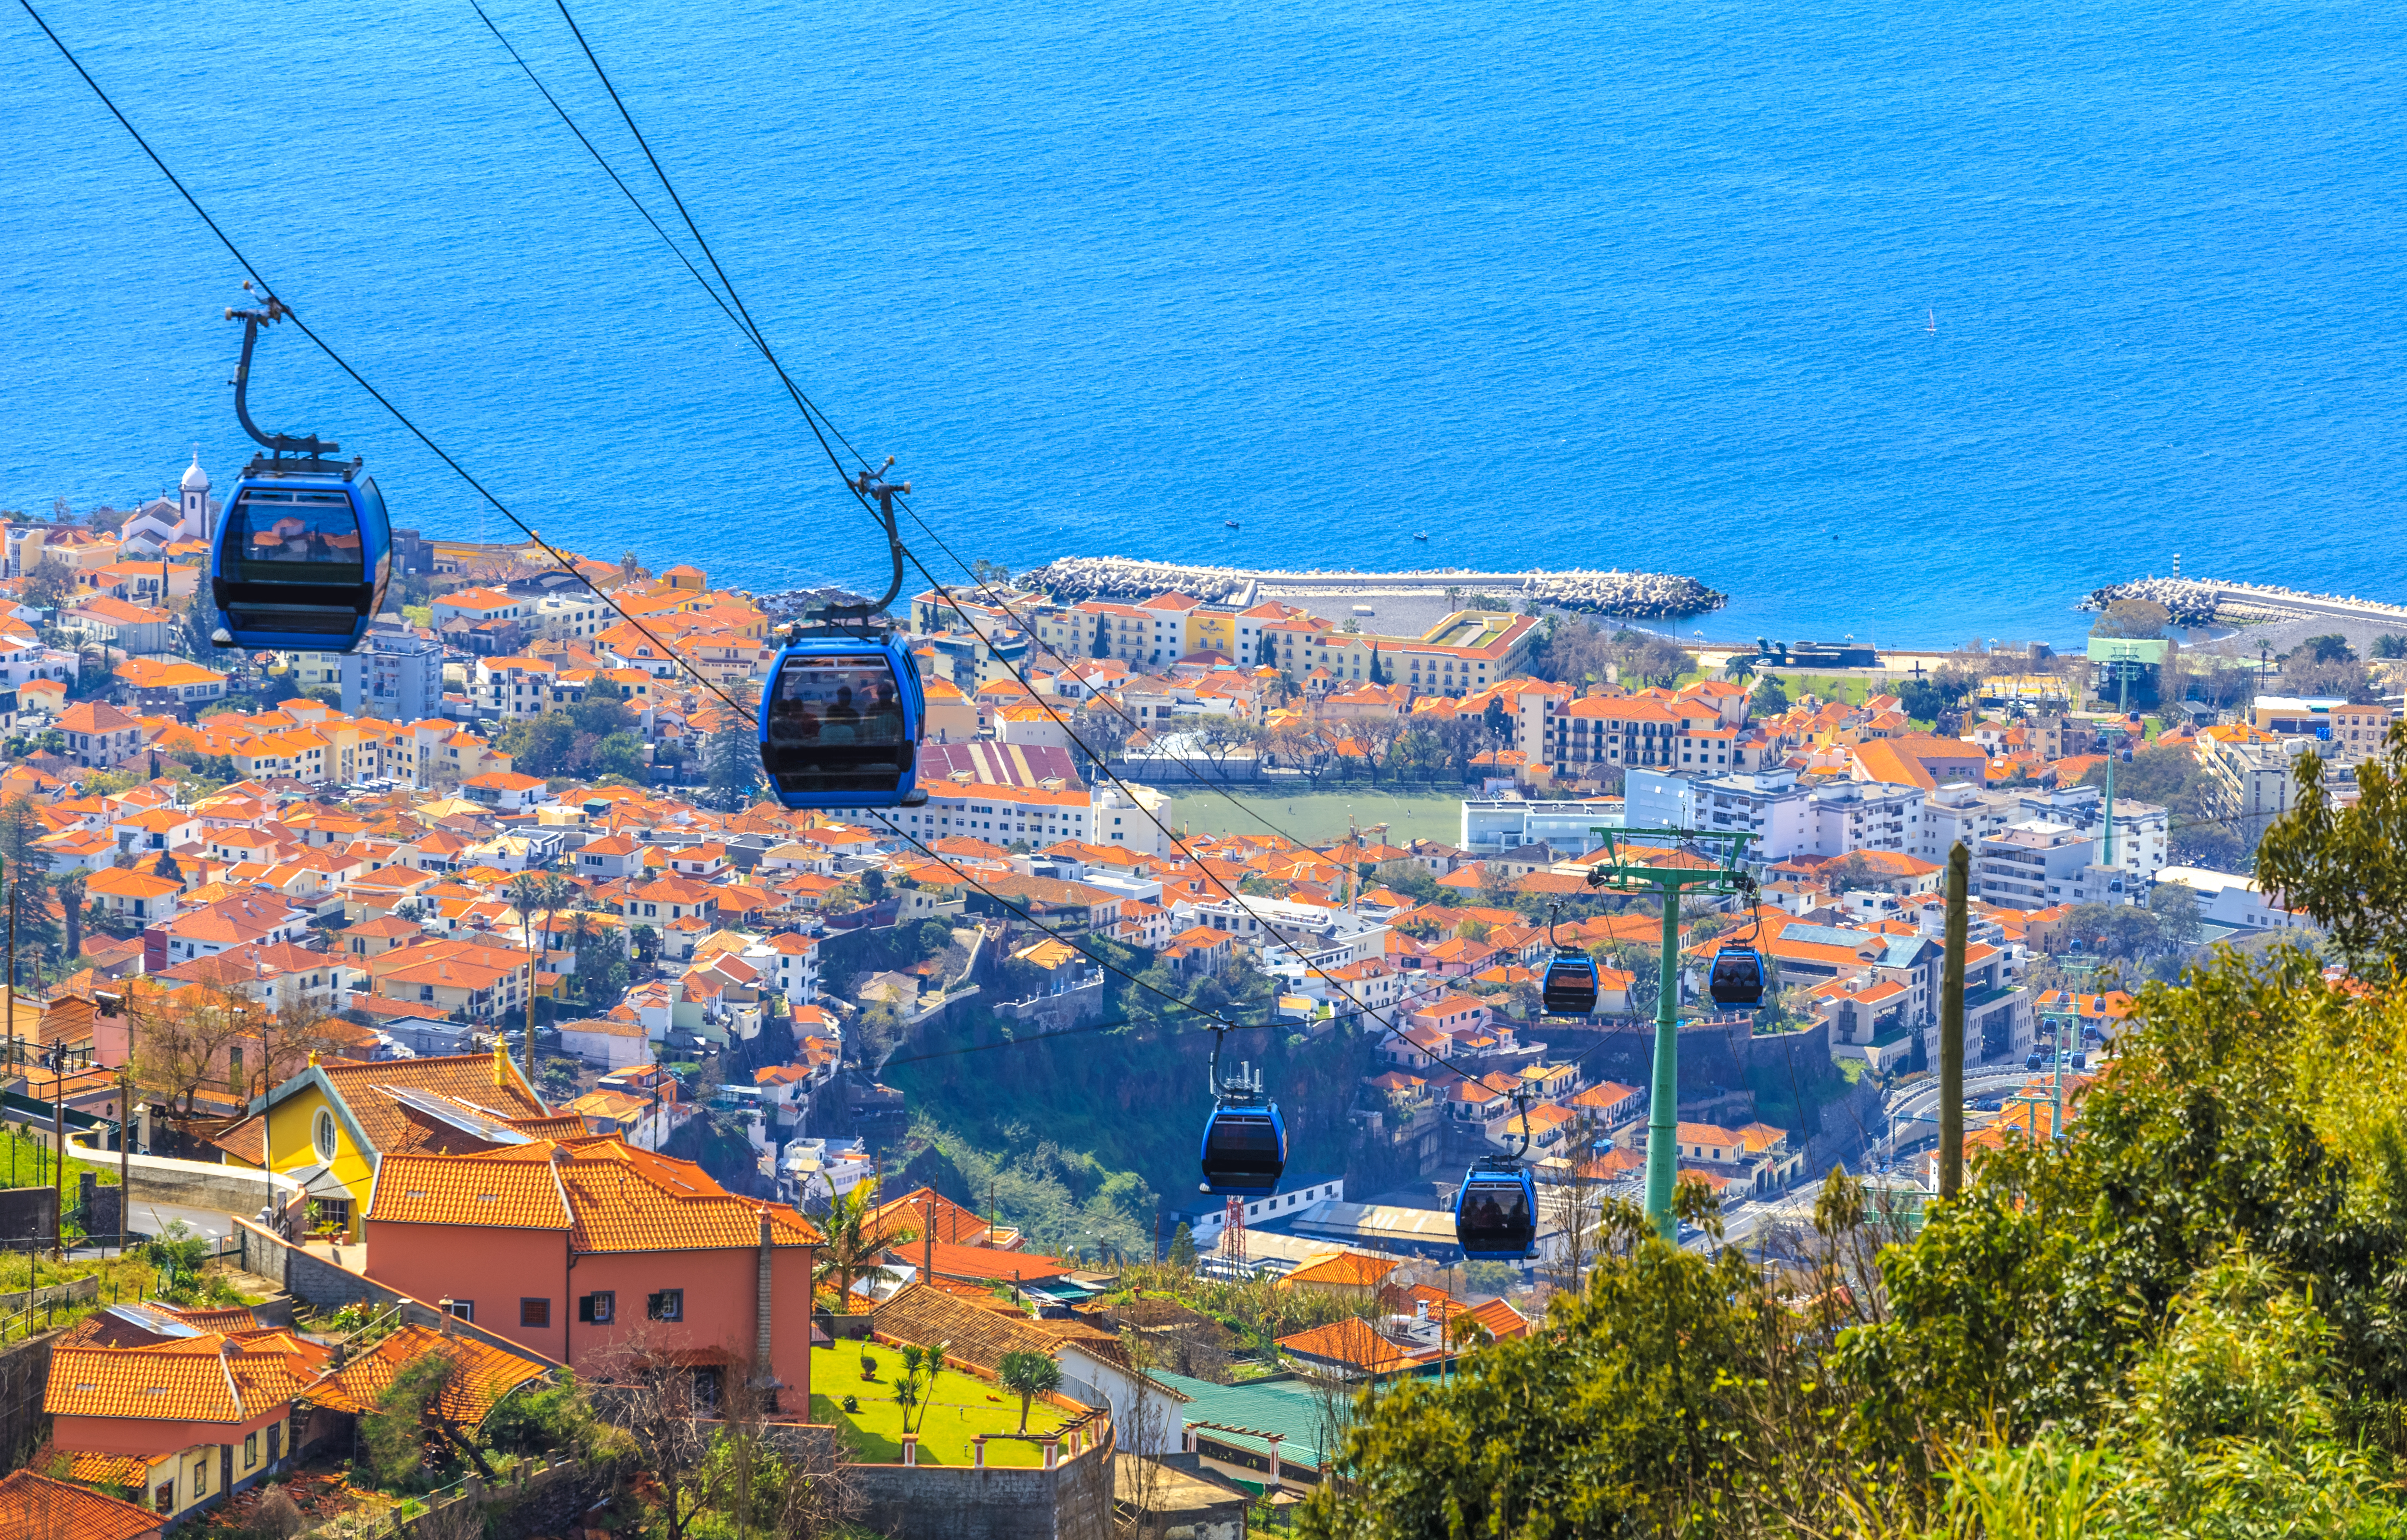 The Funchal cable car costs 12.5€ one way